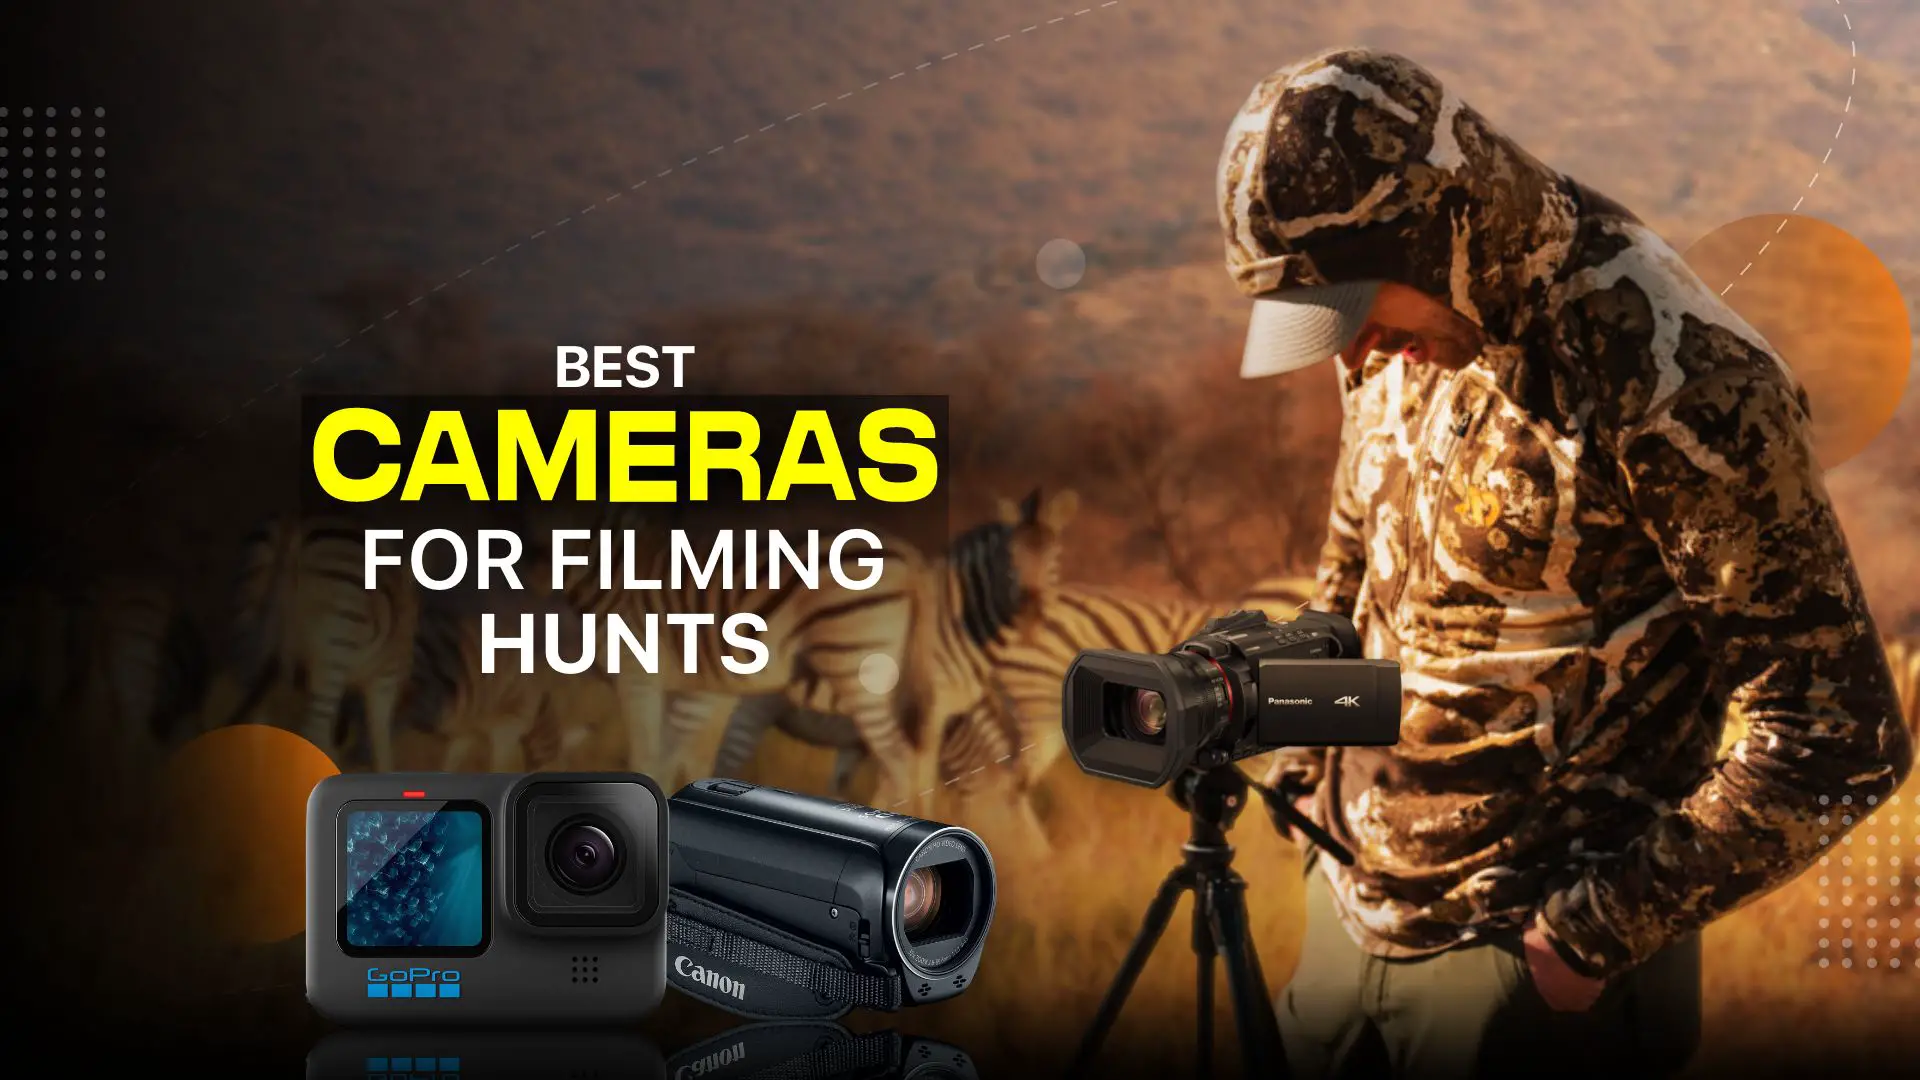 Best Cemeras for Filming Hunts